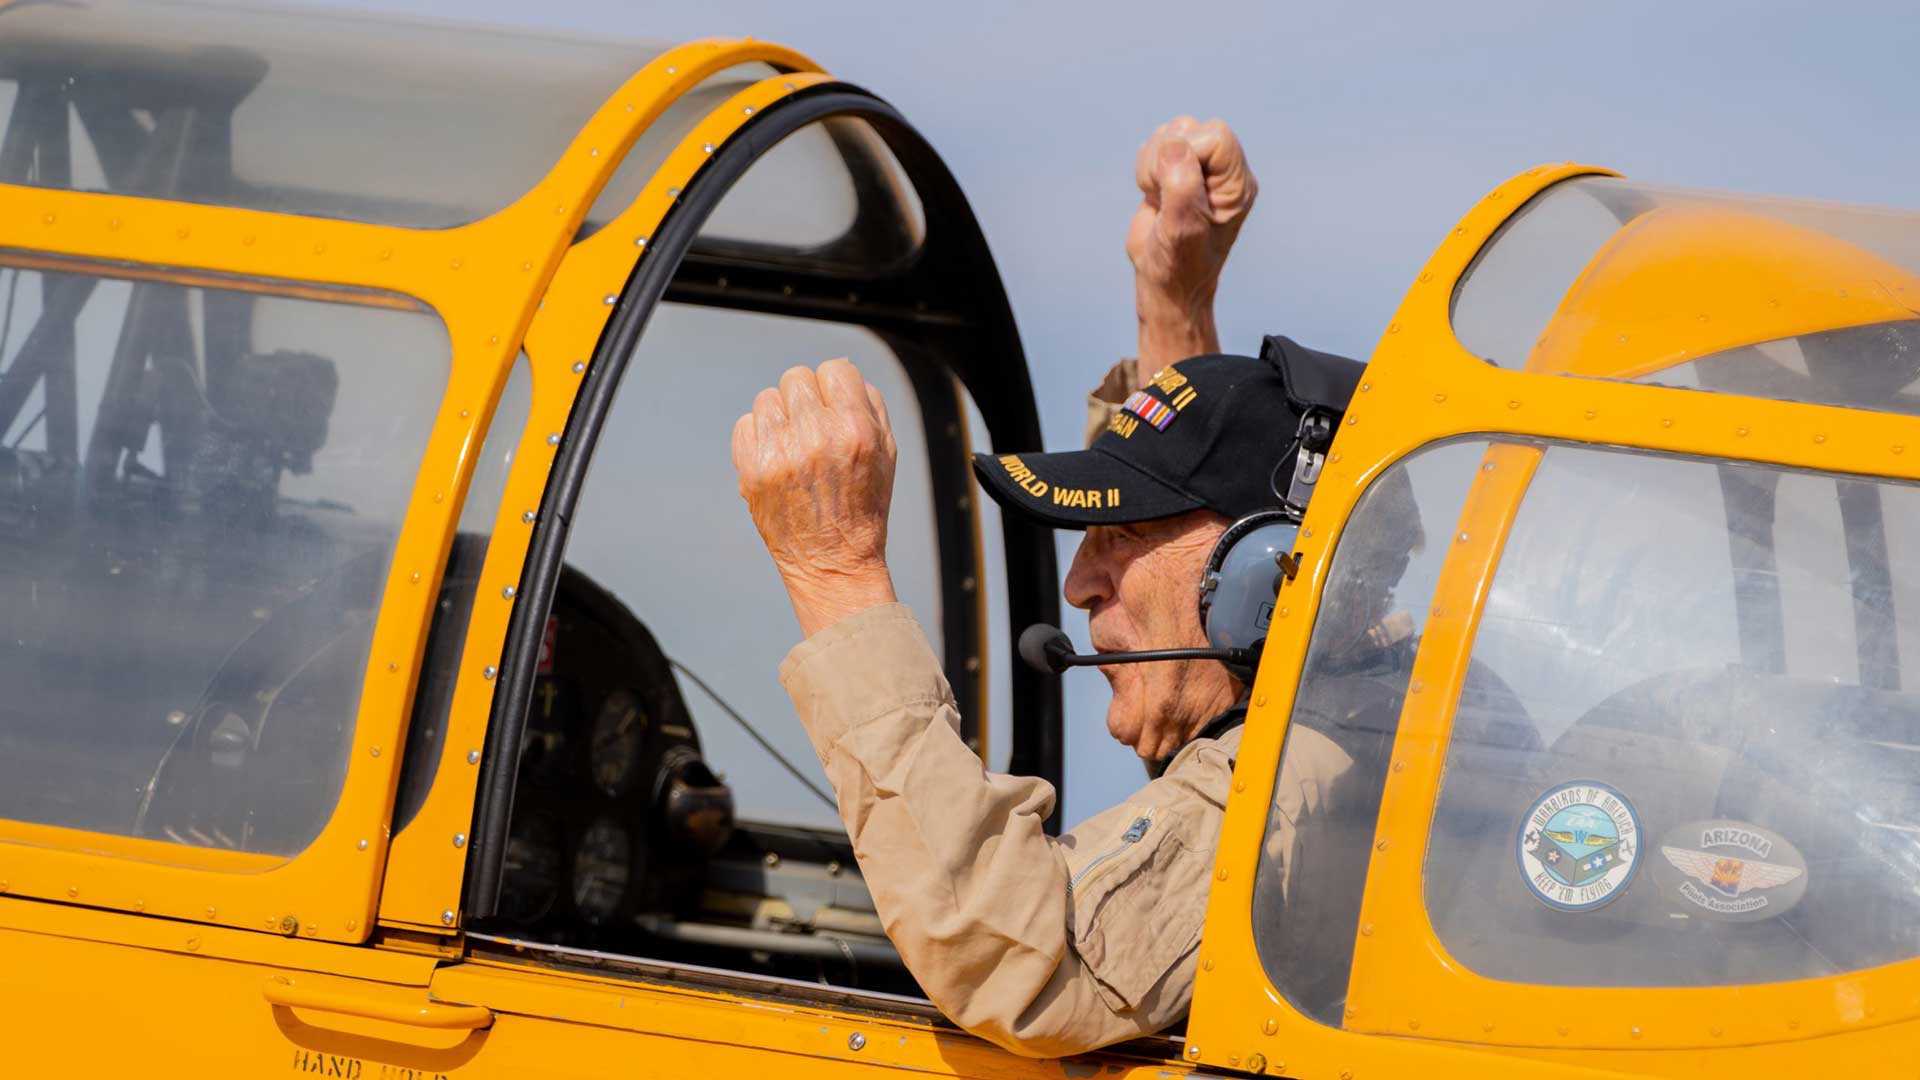 Centenarian Ted Giannone raises both hands in the air as he lands at Falcon Field Airport in Mesa on Oct. 30, 2022, after becoming Grounded No More’s 500th rider since 2016. (Photo by Samantha Chow/Cronkite News)